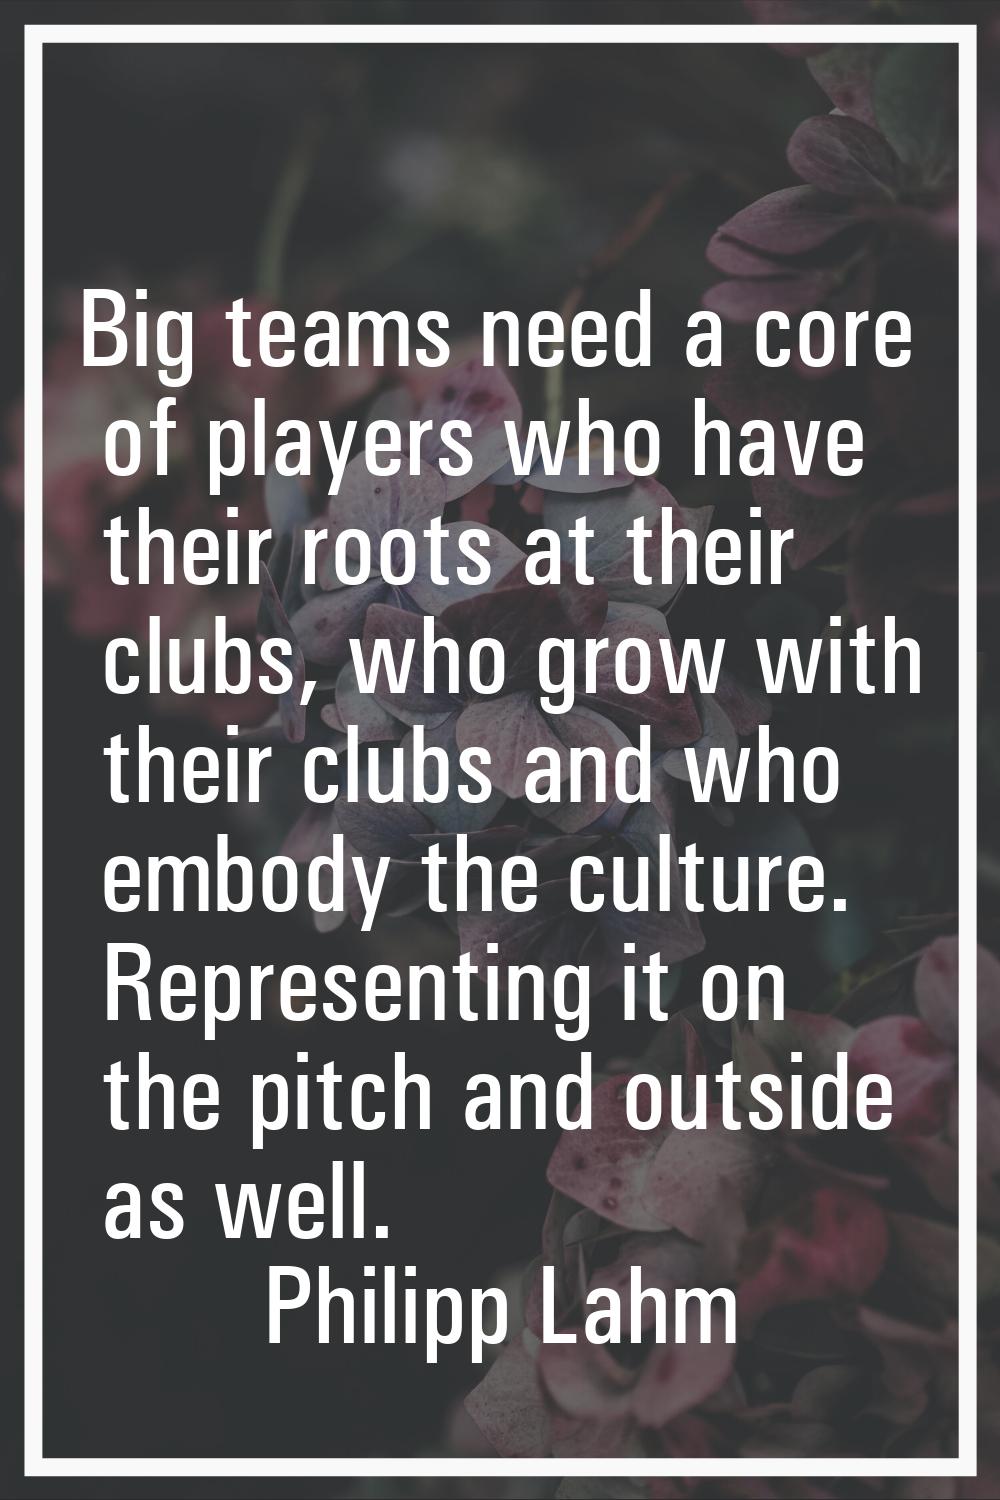 Big teams need a core of players who have their roots at their clubs, who grow with their clubs and